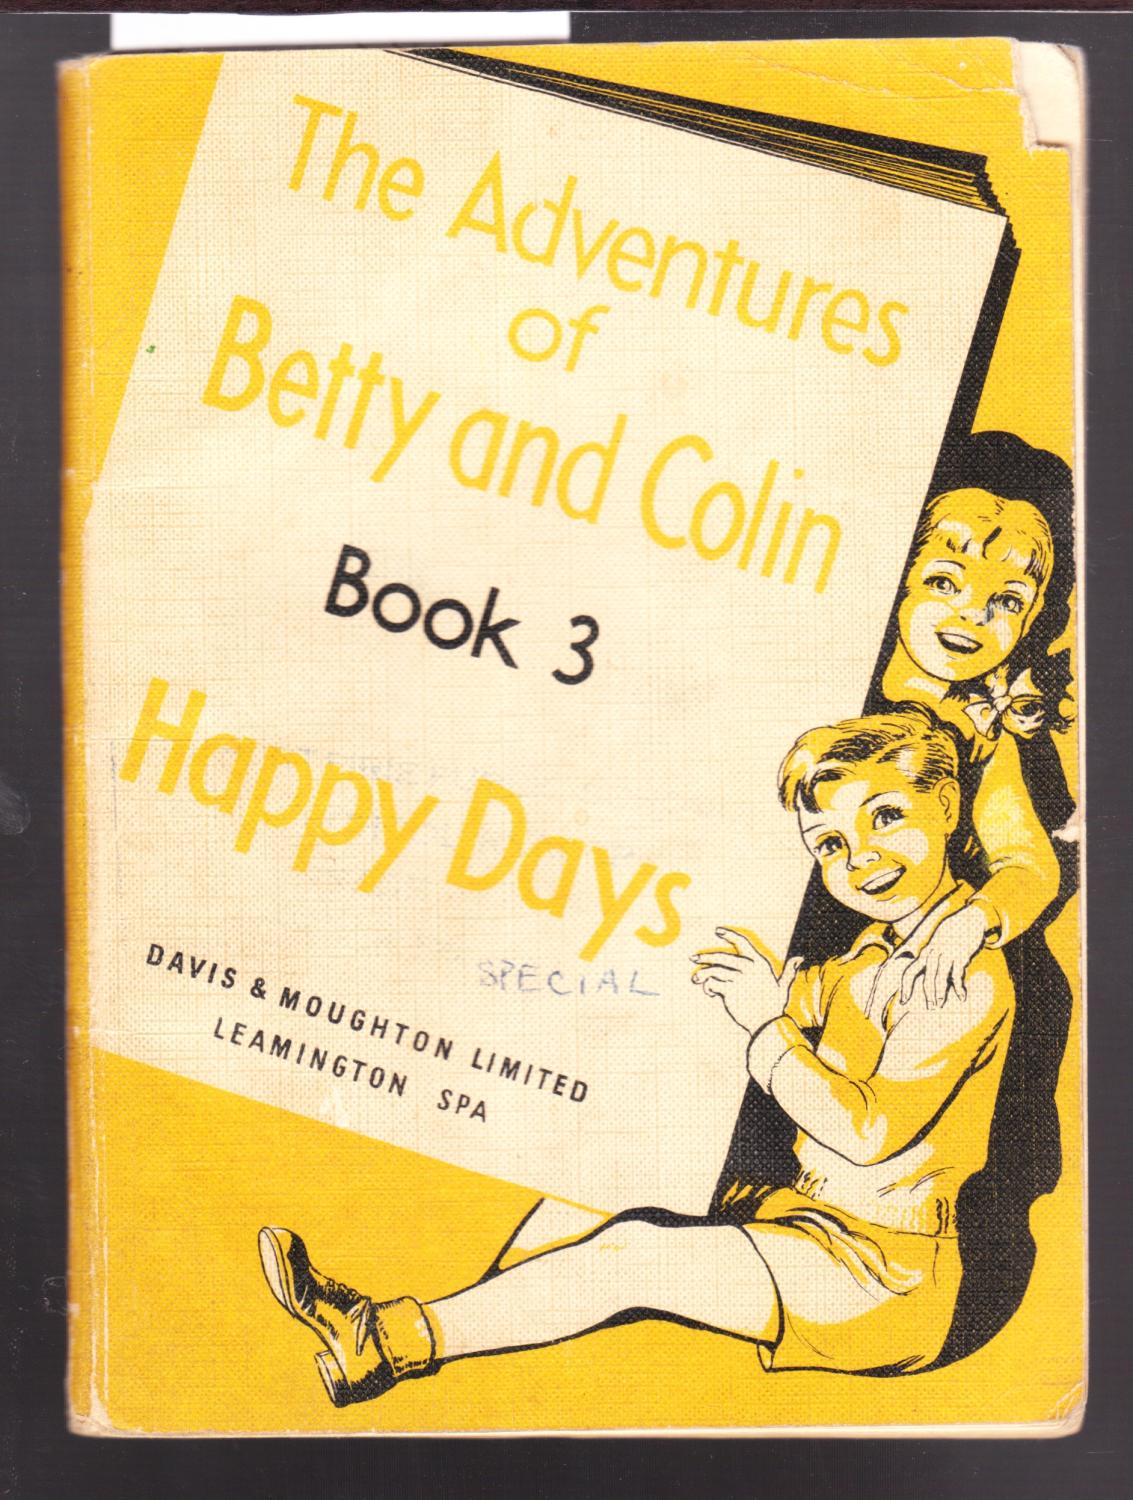 The Adventures of Betty & Colin Book 3 Happy Days: Good Soft Cover (1958)  First Edition.